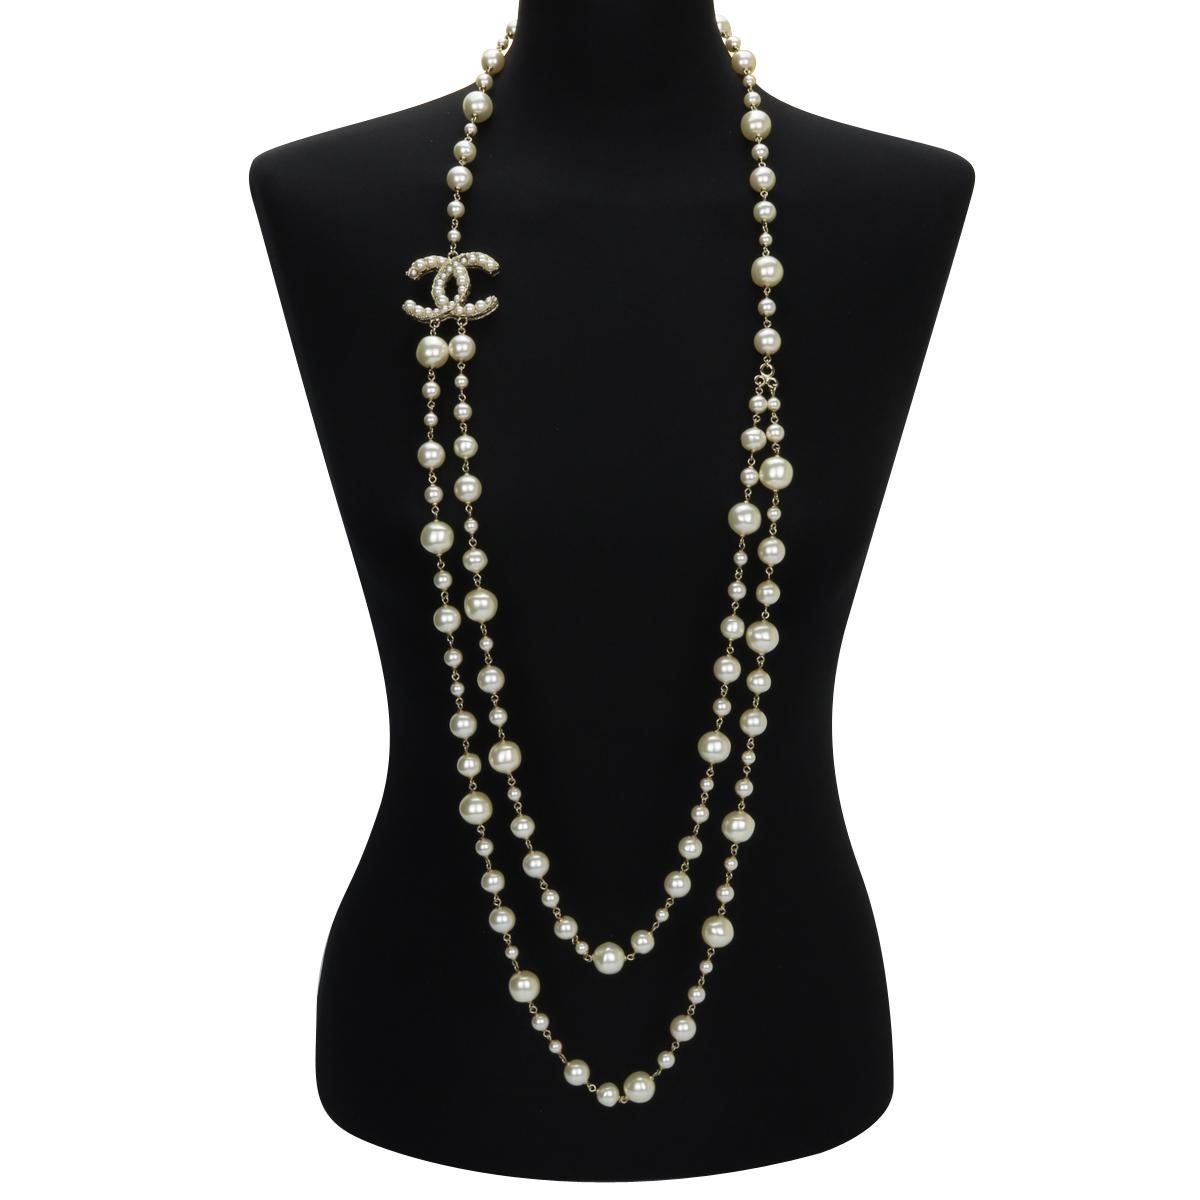 CHANEL Two Strands Pearl Gold Long Necklace 2011.

This stunning necklace is in Brand new condition.

Exterior Condition: Brand new condition.

Chain Condition: Brand new condition.

Includes: box, ribbon, camellia and an authentication certificate